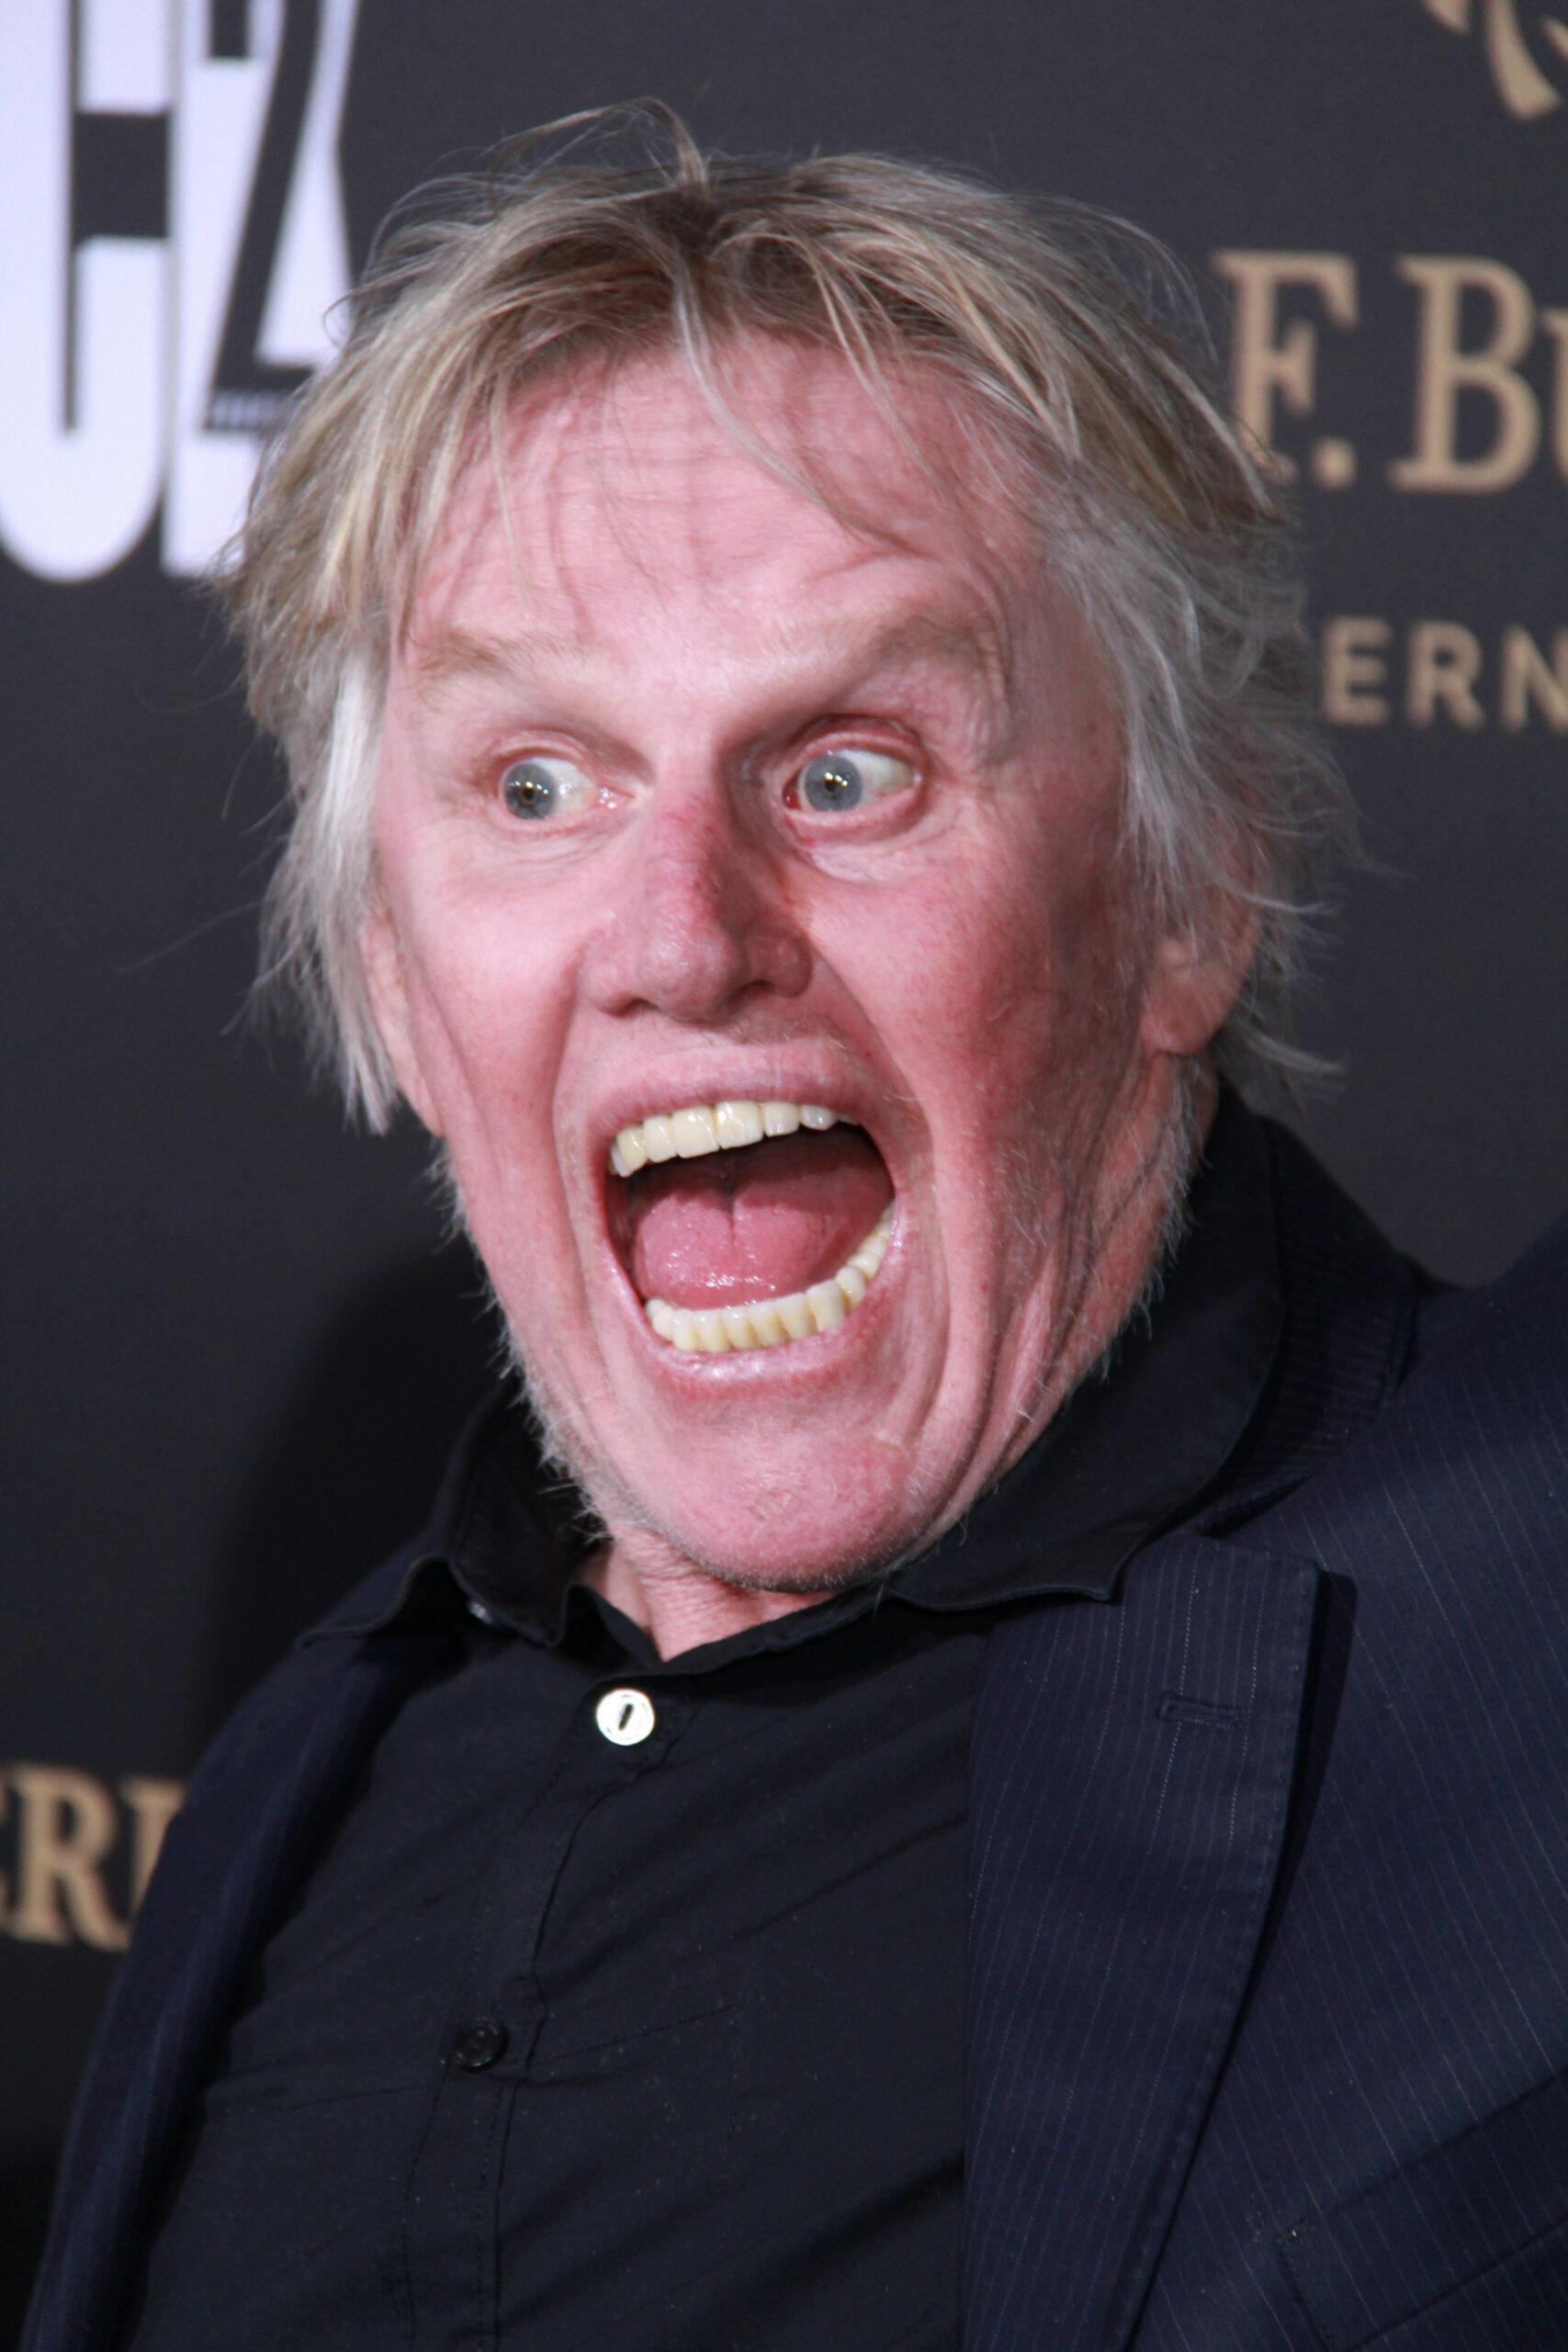 Gary Busey 01/30/2017 The Los Angeles Premiere of "John Wick: Chapter 2"